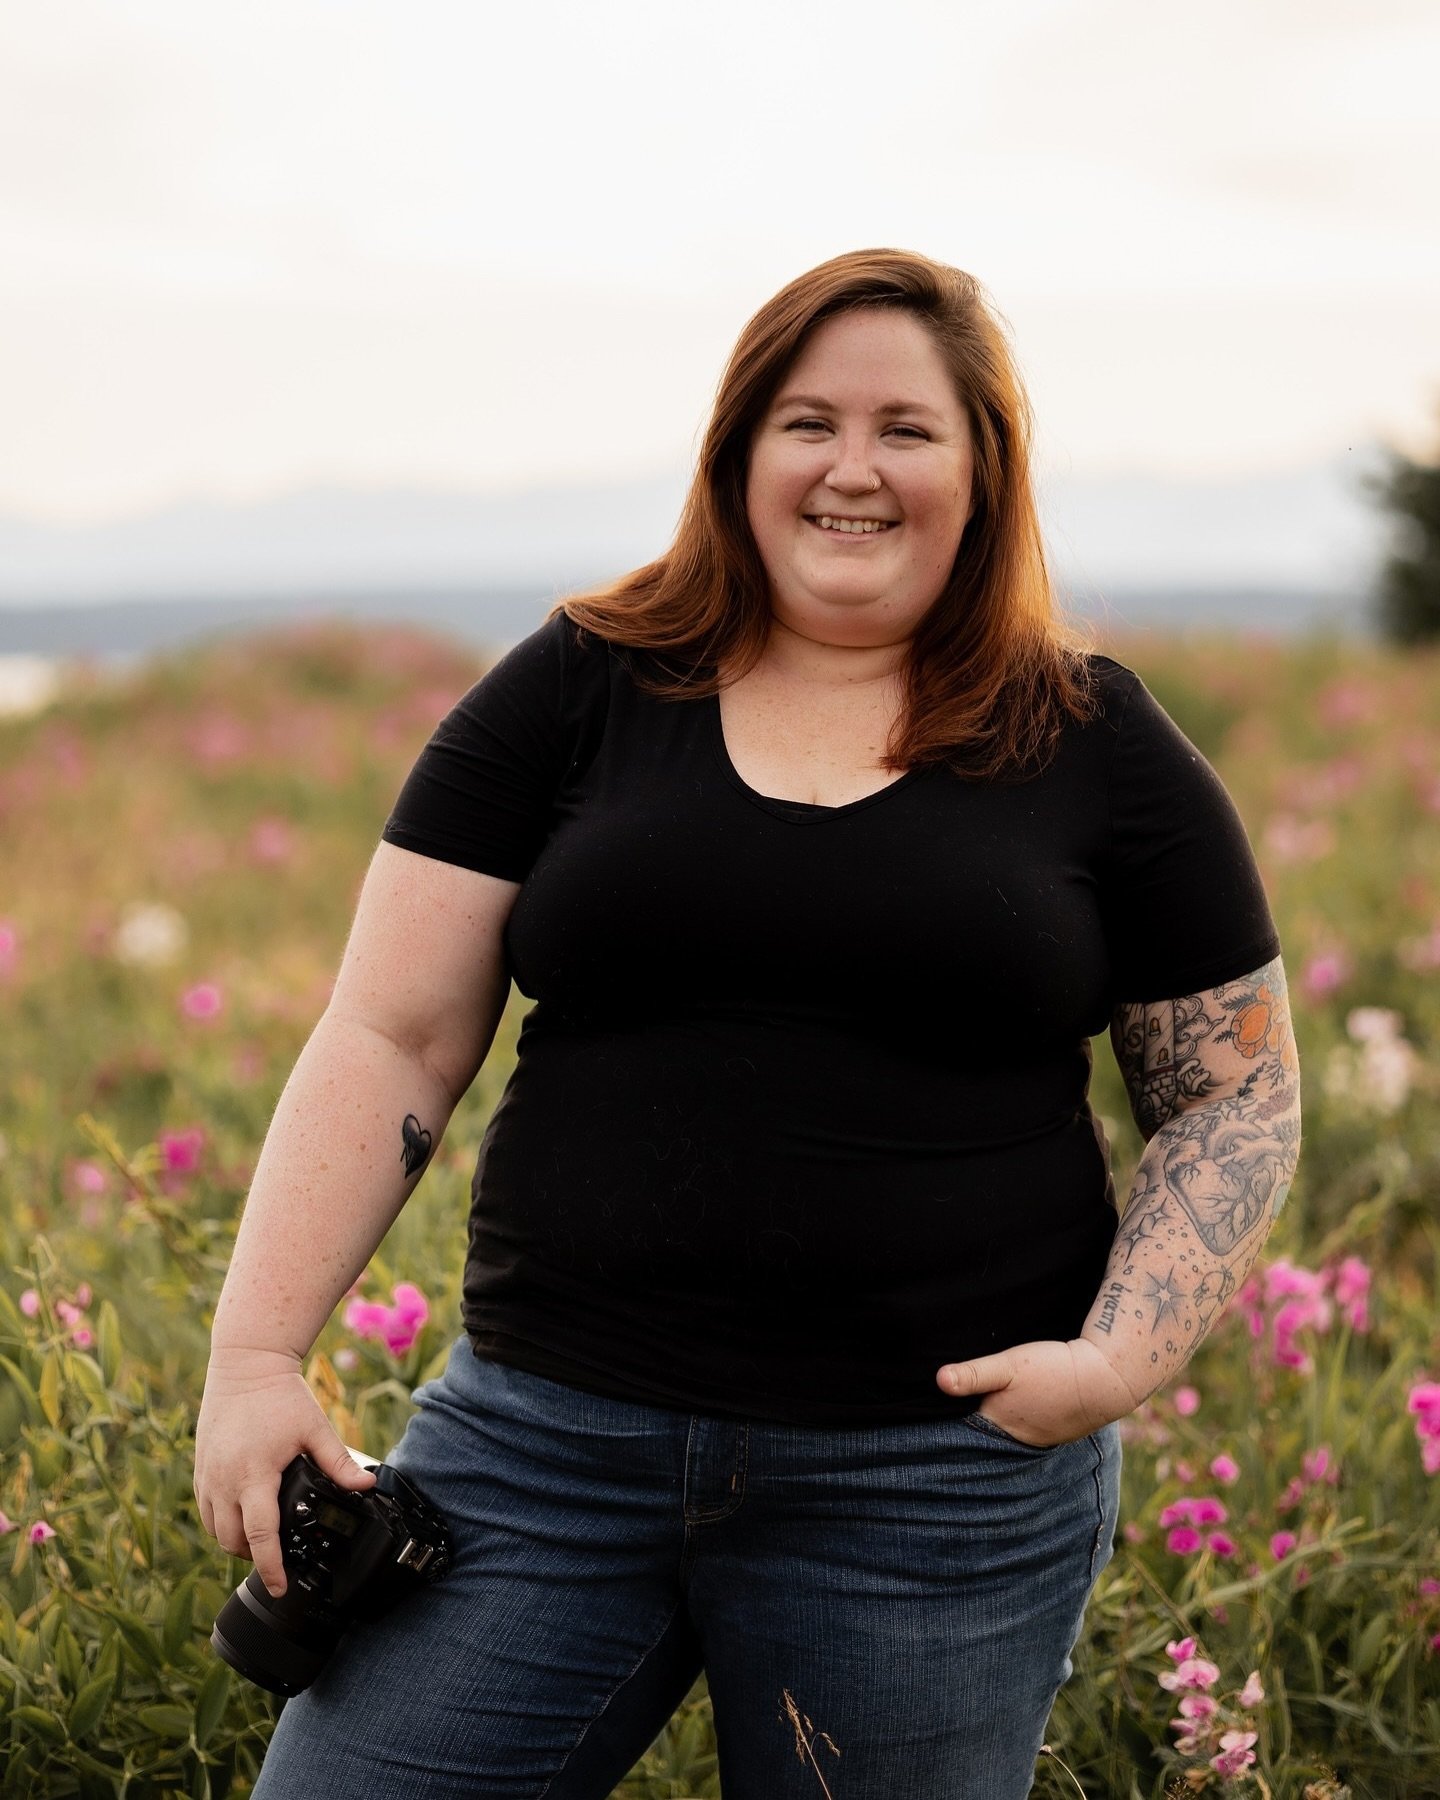 Hi friends! I&rsquo;ve noticed some new faces around here recently, so I think a reintroduction is in order.⁠
⁠
I&rsquo;m Jessica!⁠
⁠
For over 12 years, I worked as a nanny for many amazing families, which really tuned me into the magic of everyday m